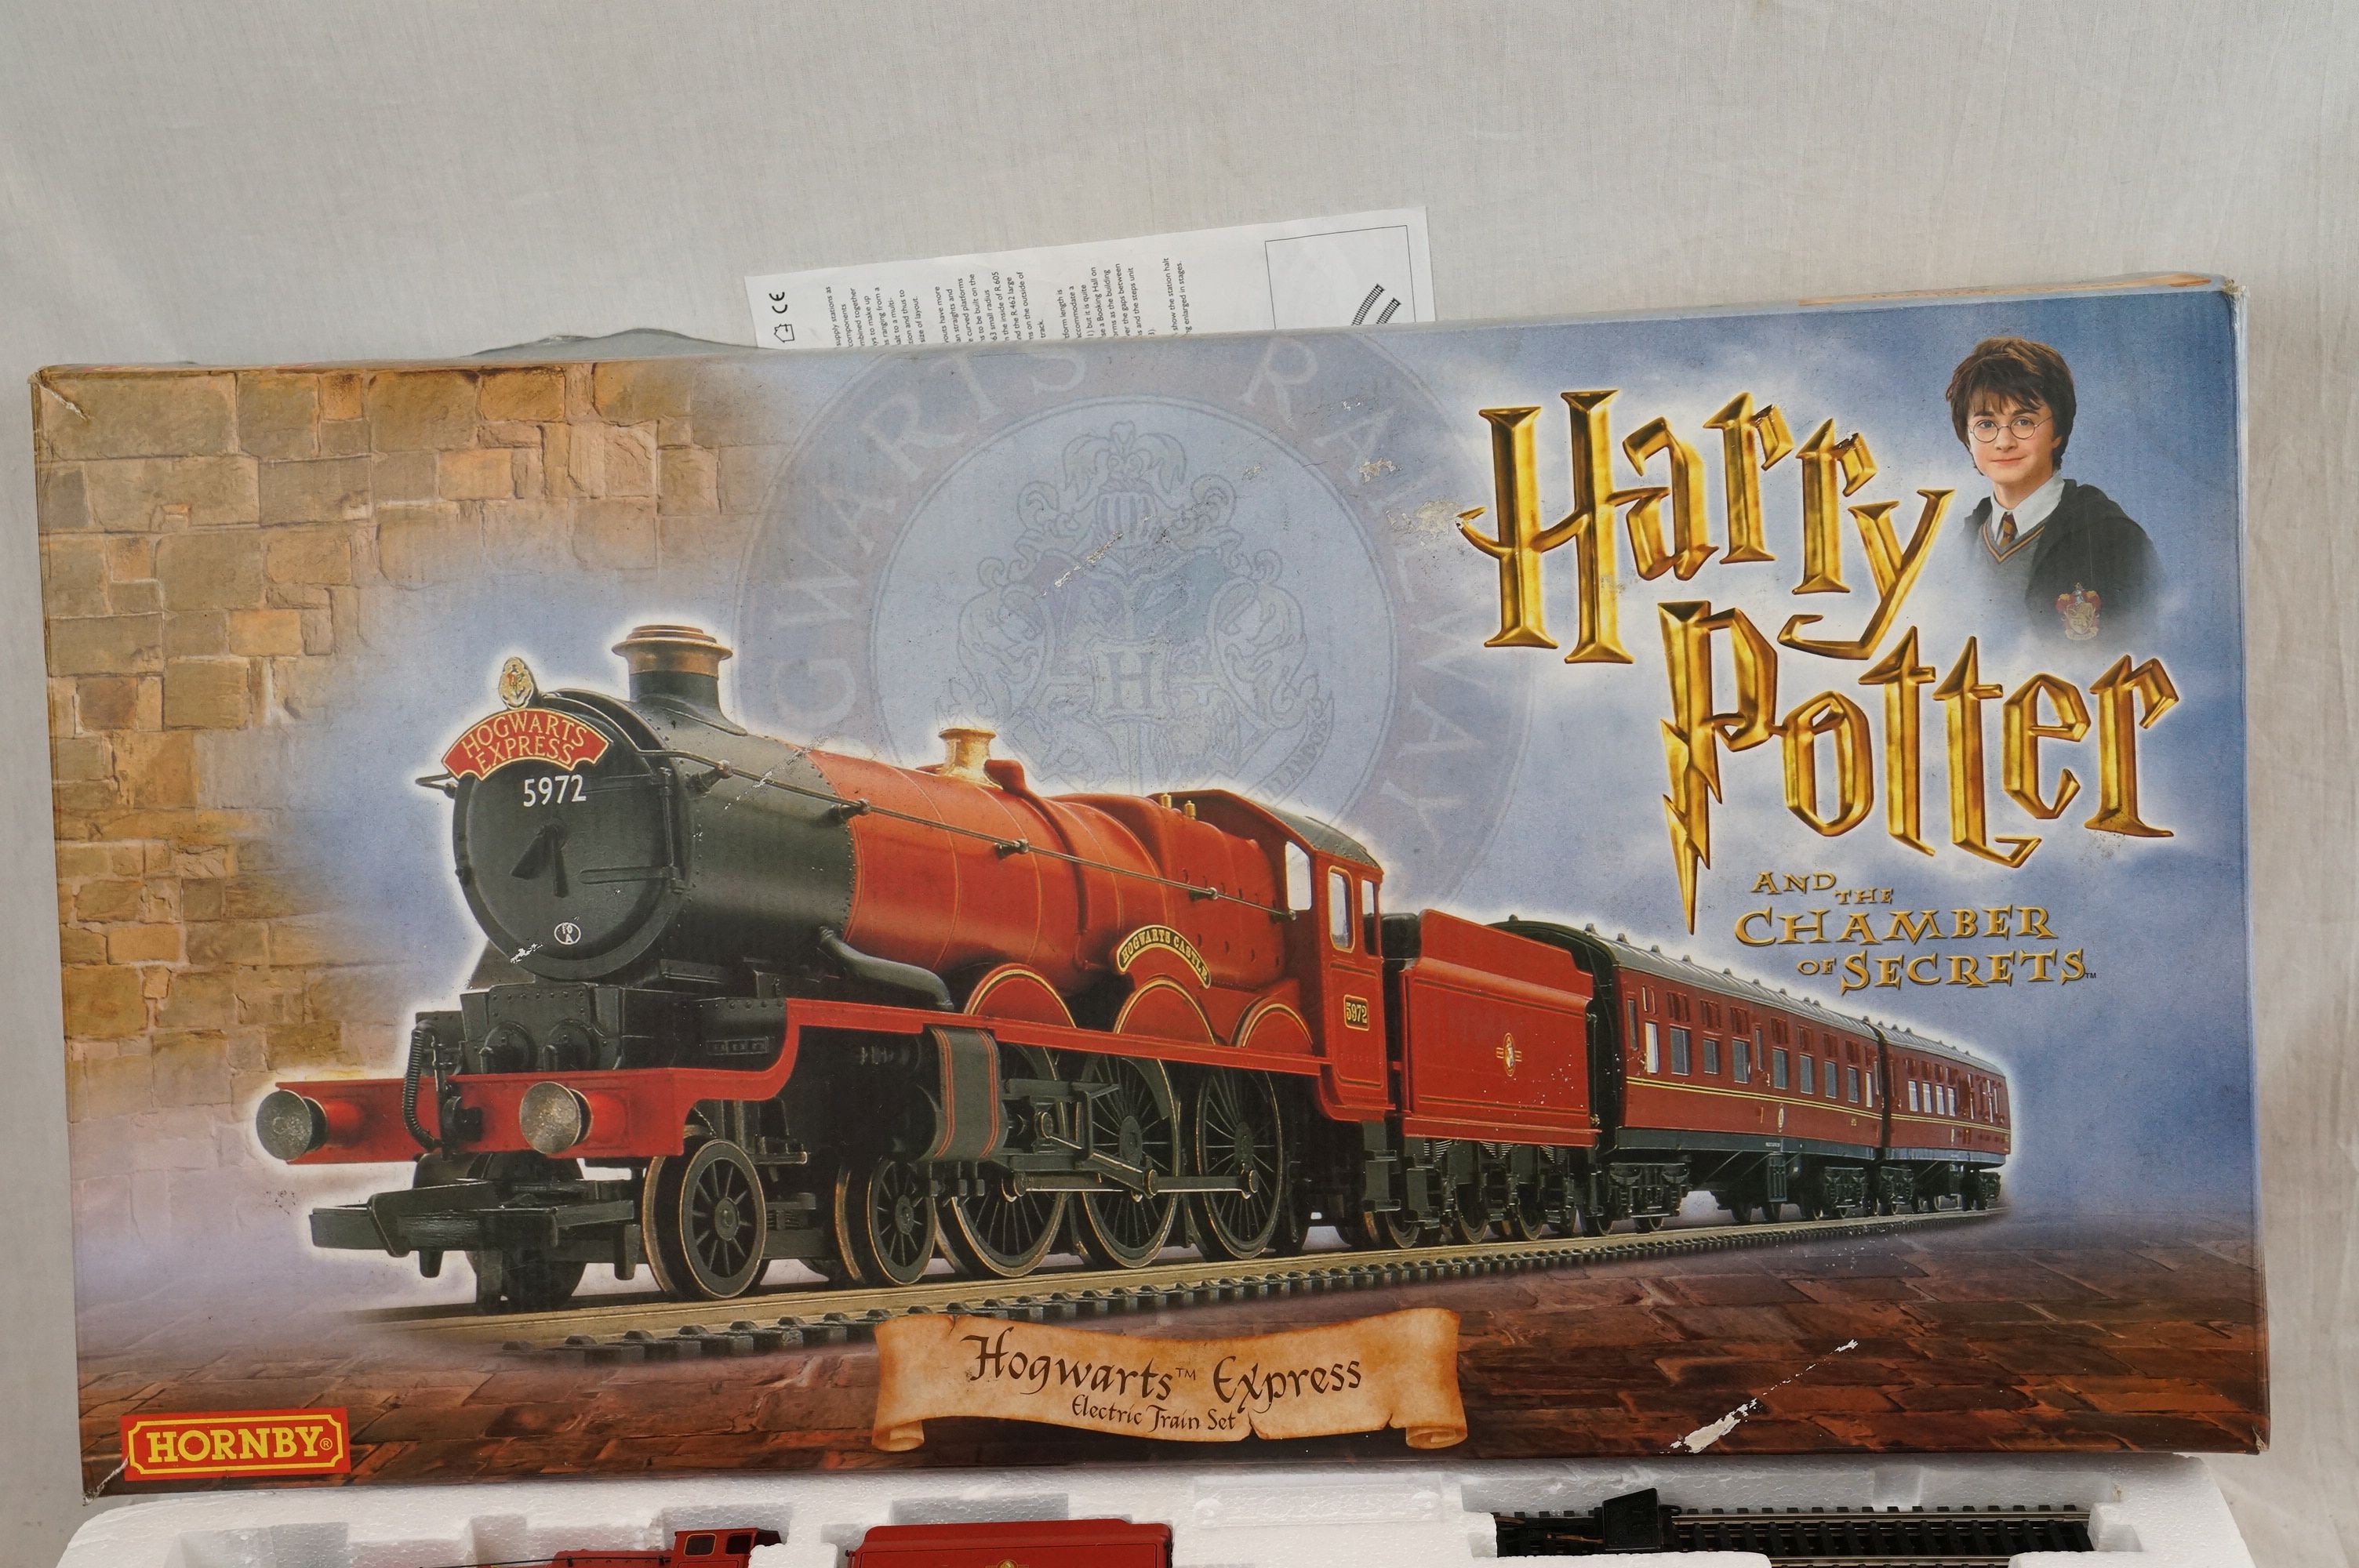 Boxed Hornby Harry Potter and the Chamber of Secrets R1033 Hogwarts Express electric train set - Image 2 of 9